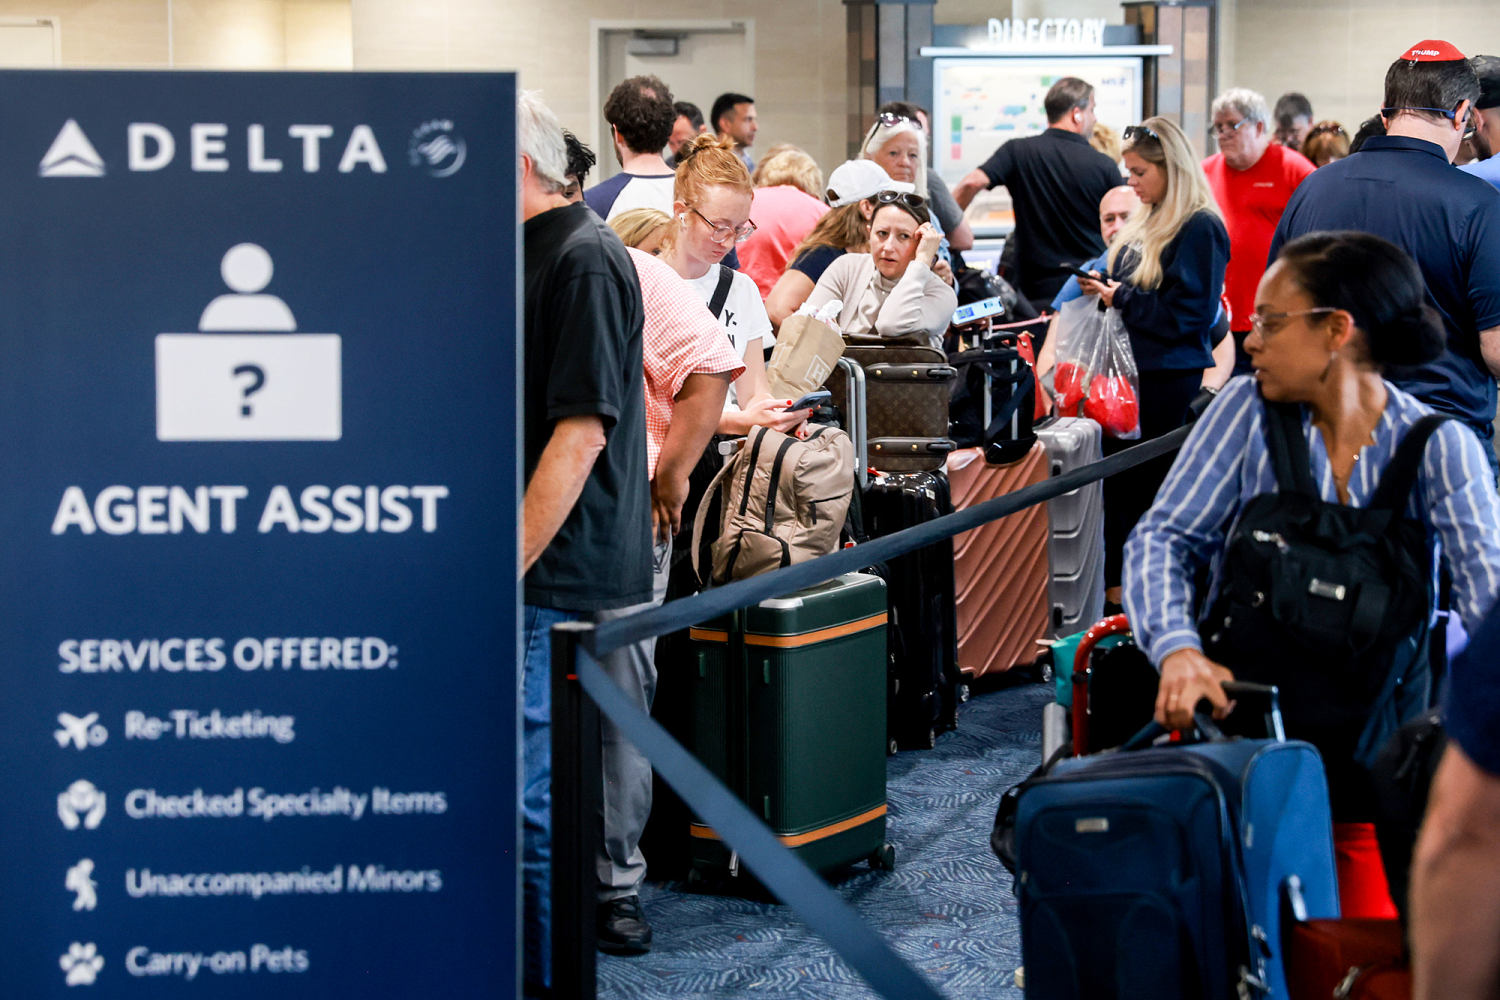 Delta Airlines cancellations and delays continue but worst of IT outage impact is over, CEO says